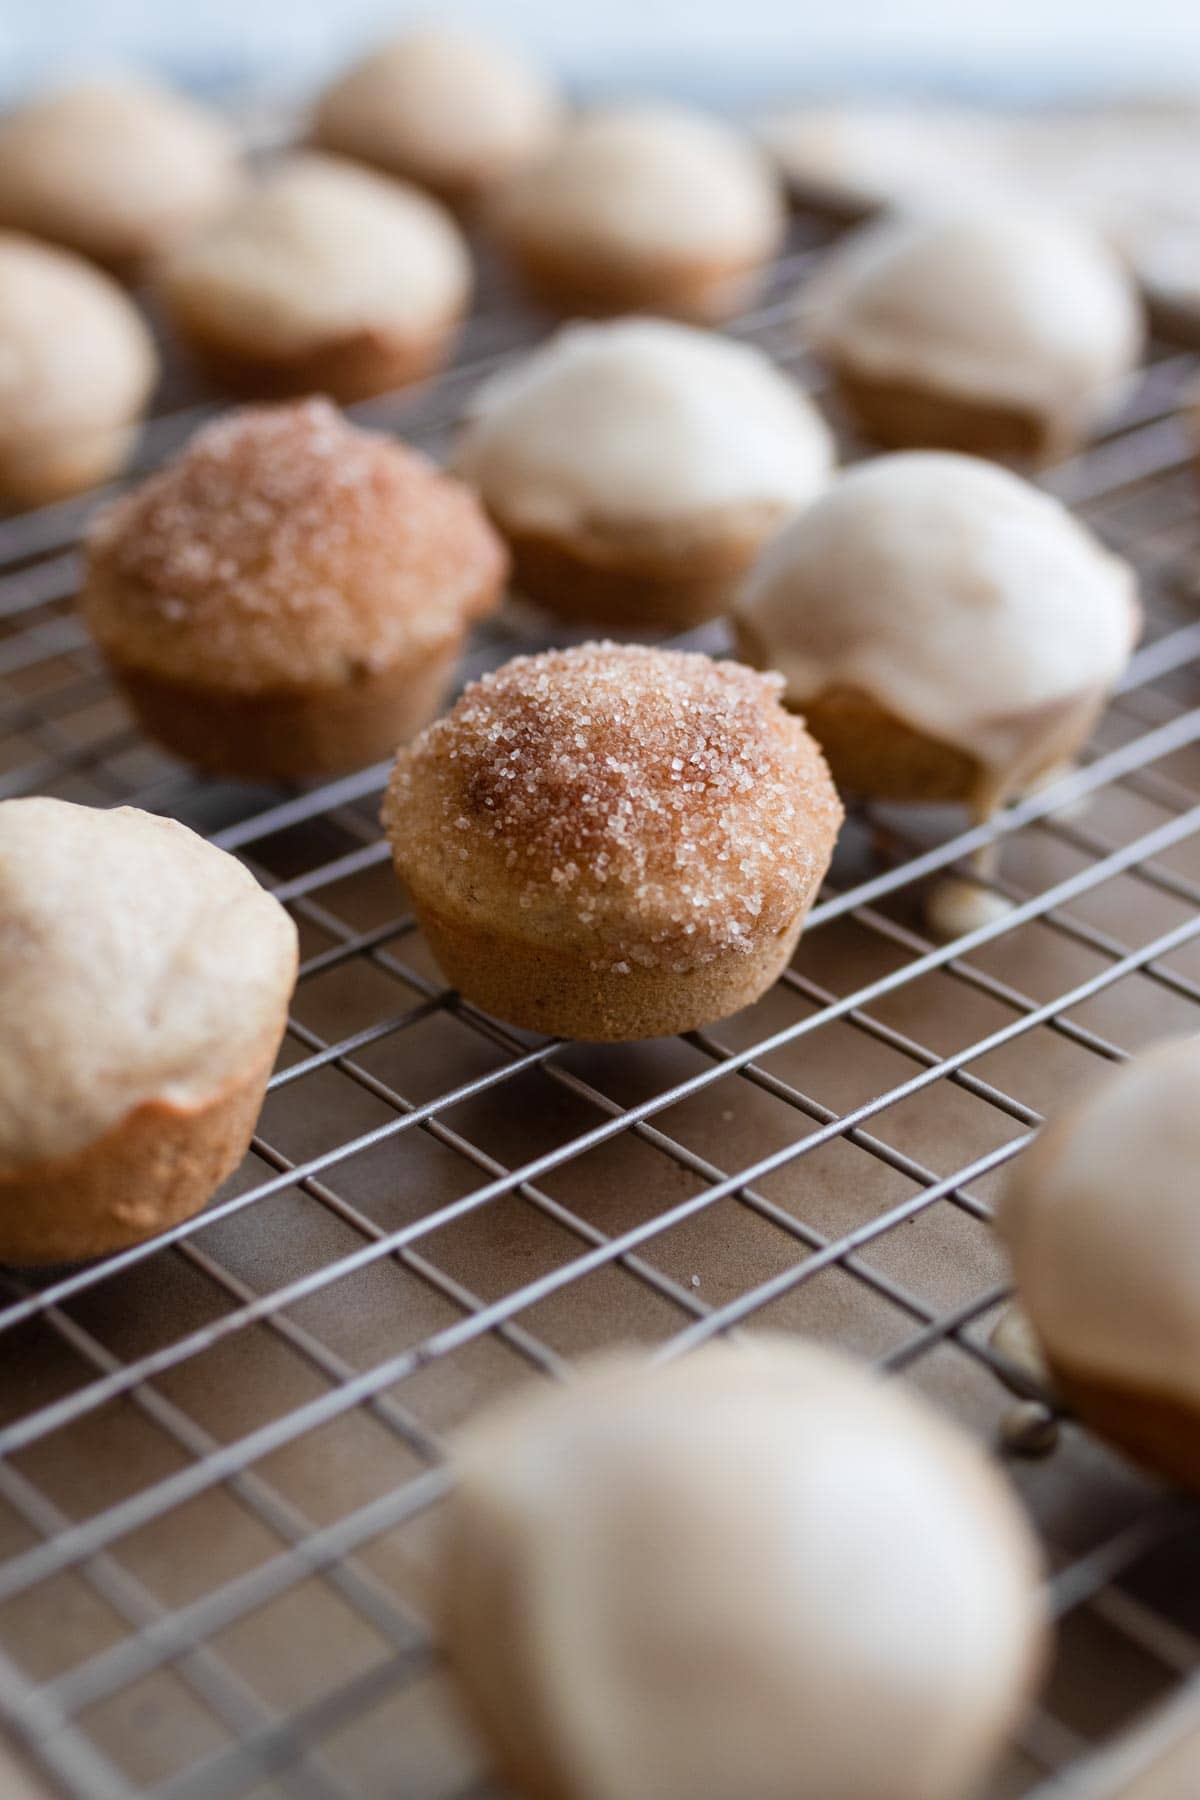 Donut holes on a baking rack after being coated with cinnamon sugar and glaze.